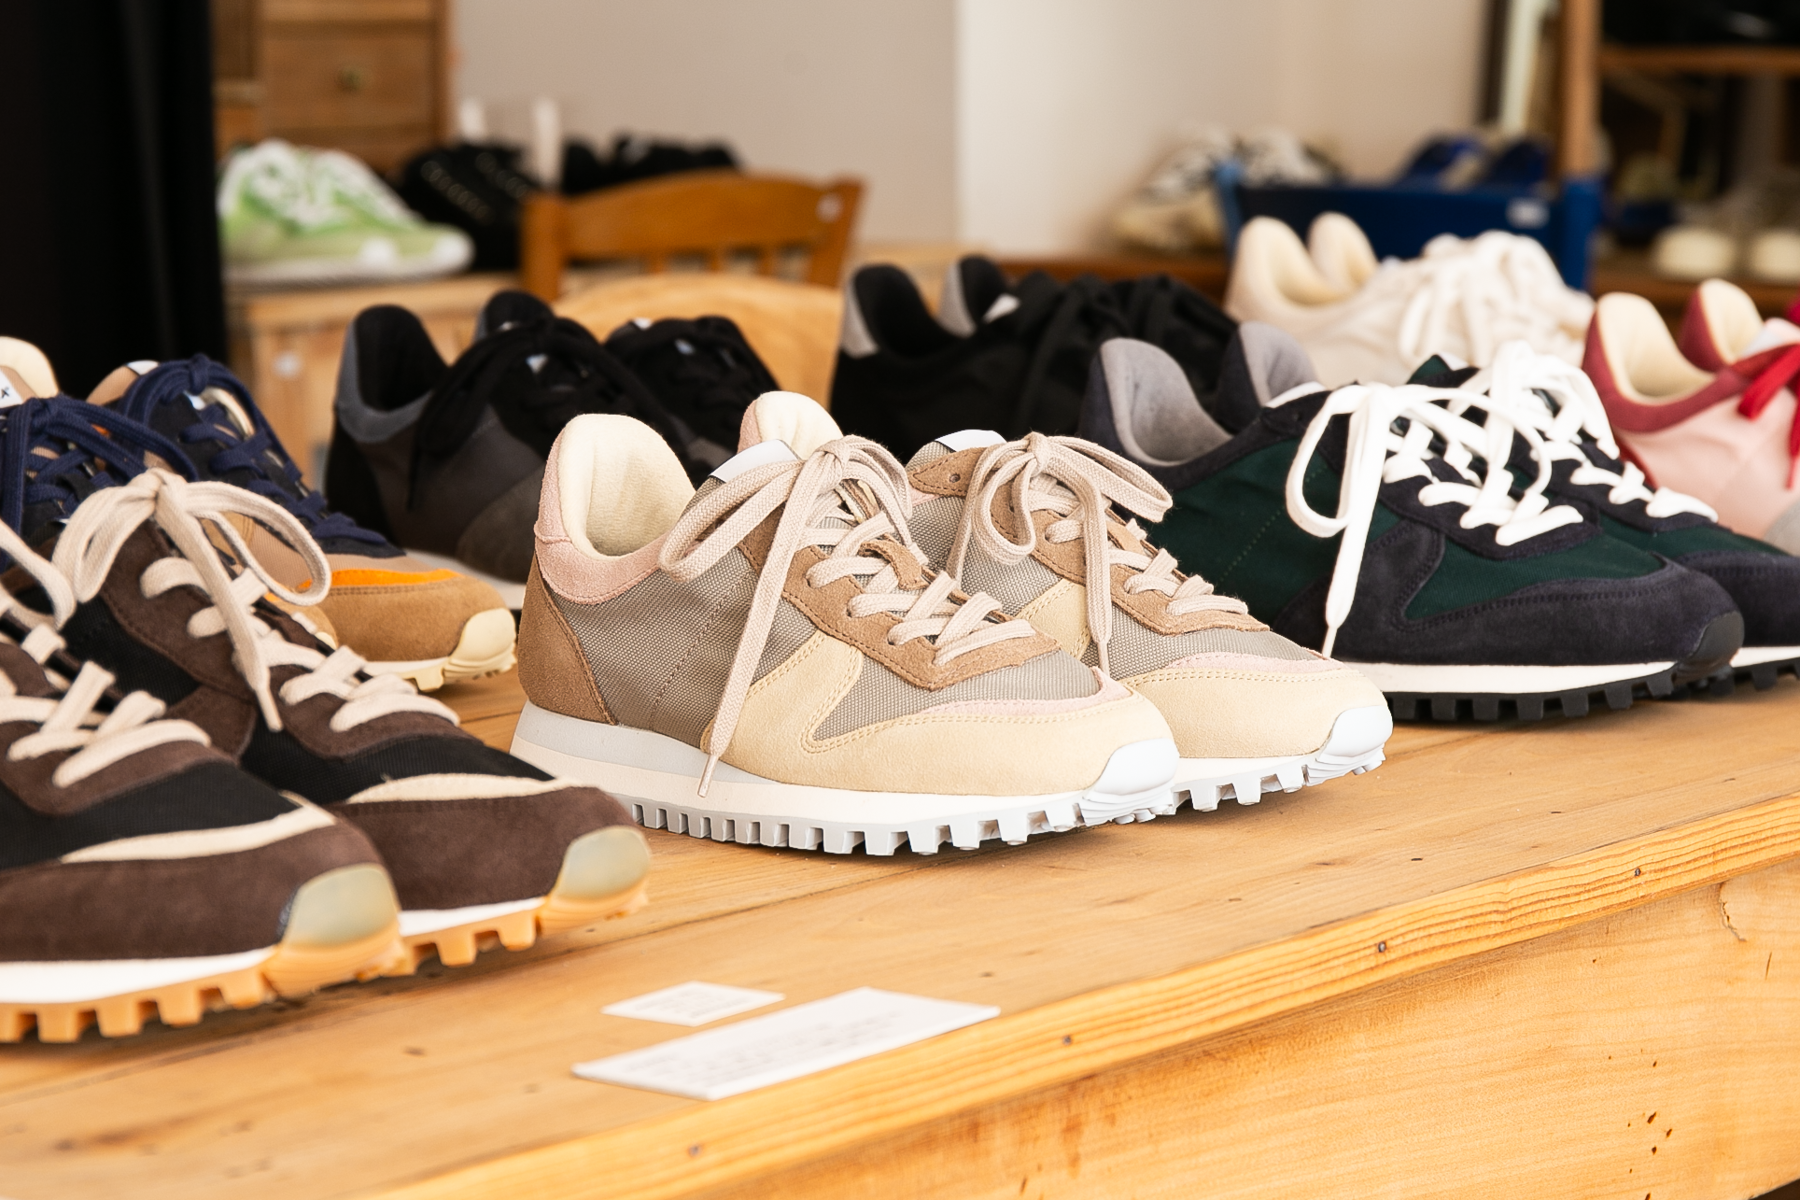 RECTOHALL - NOVESTA 2023 A/W Slovak Sneakers Collection